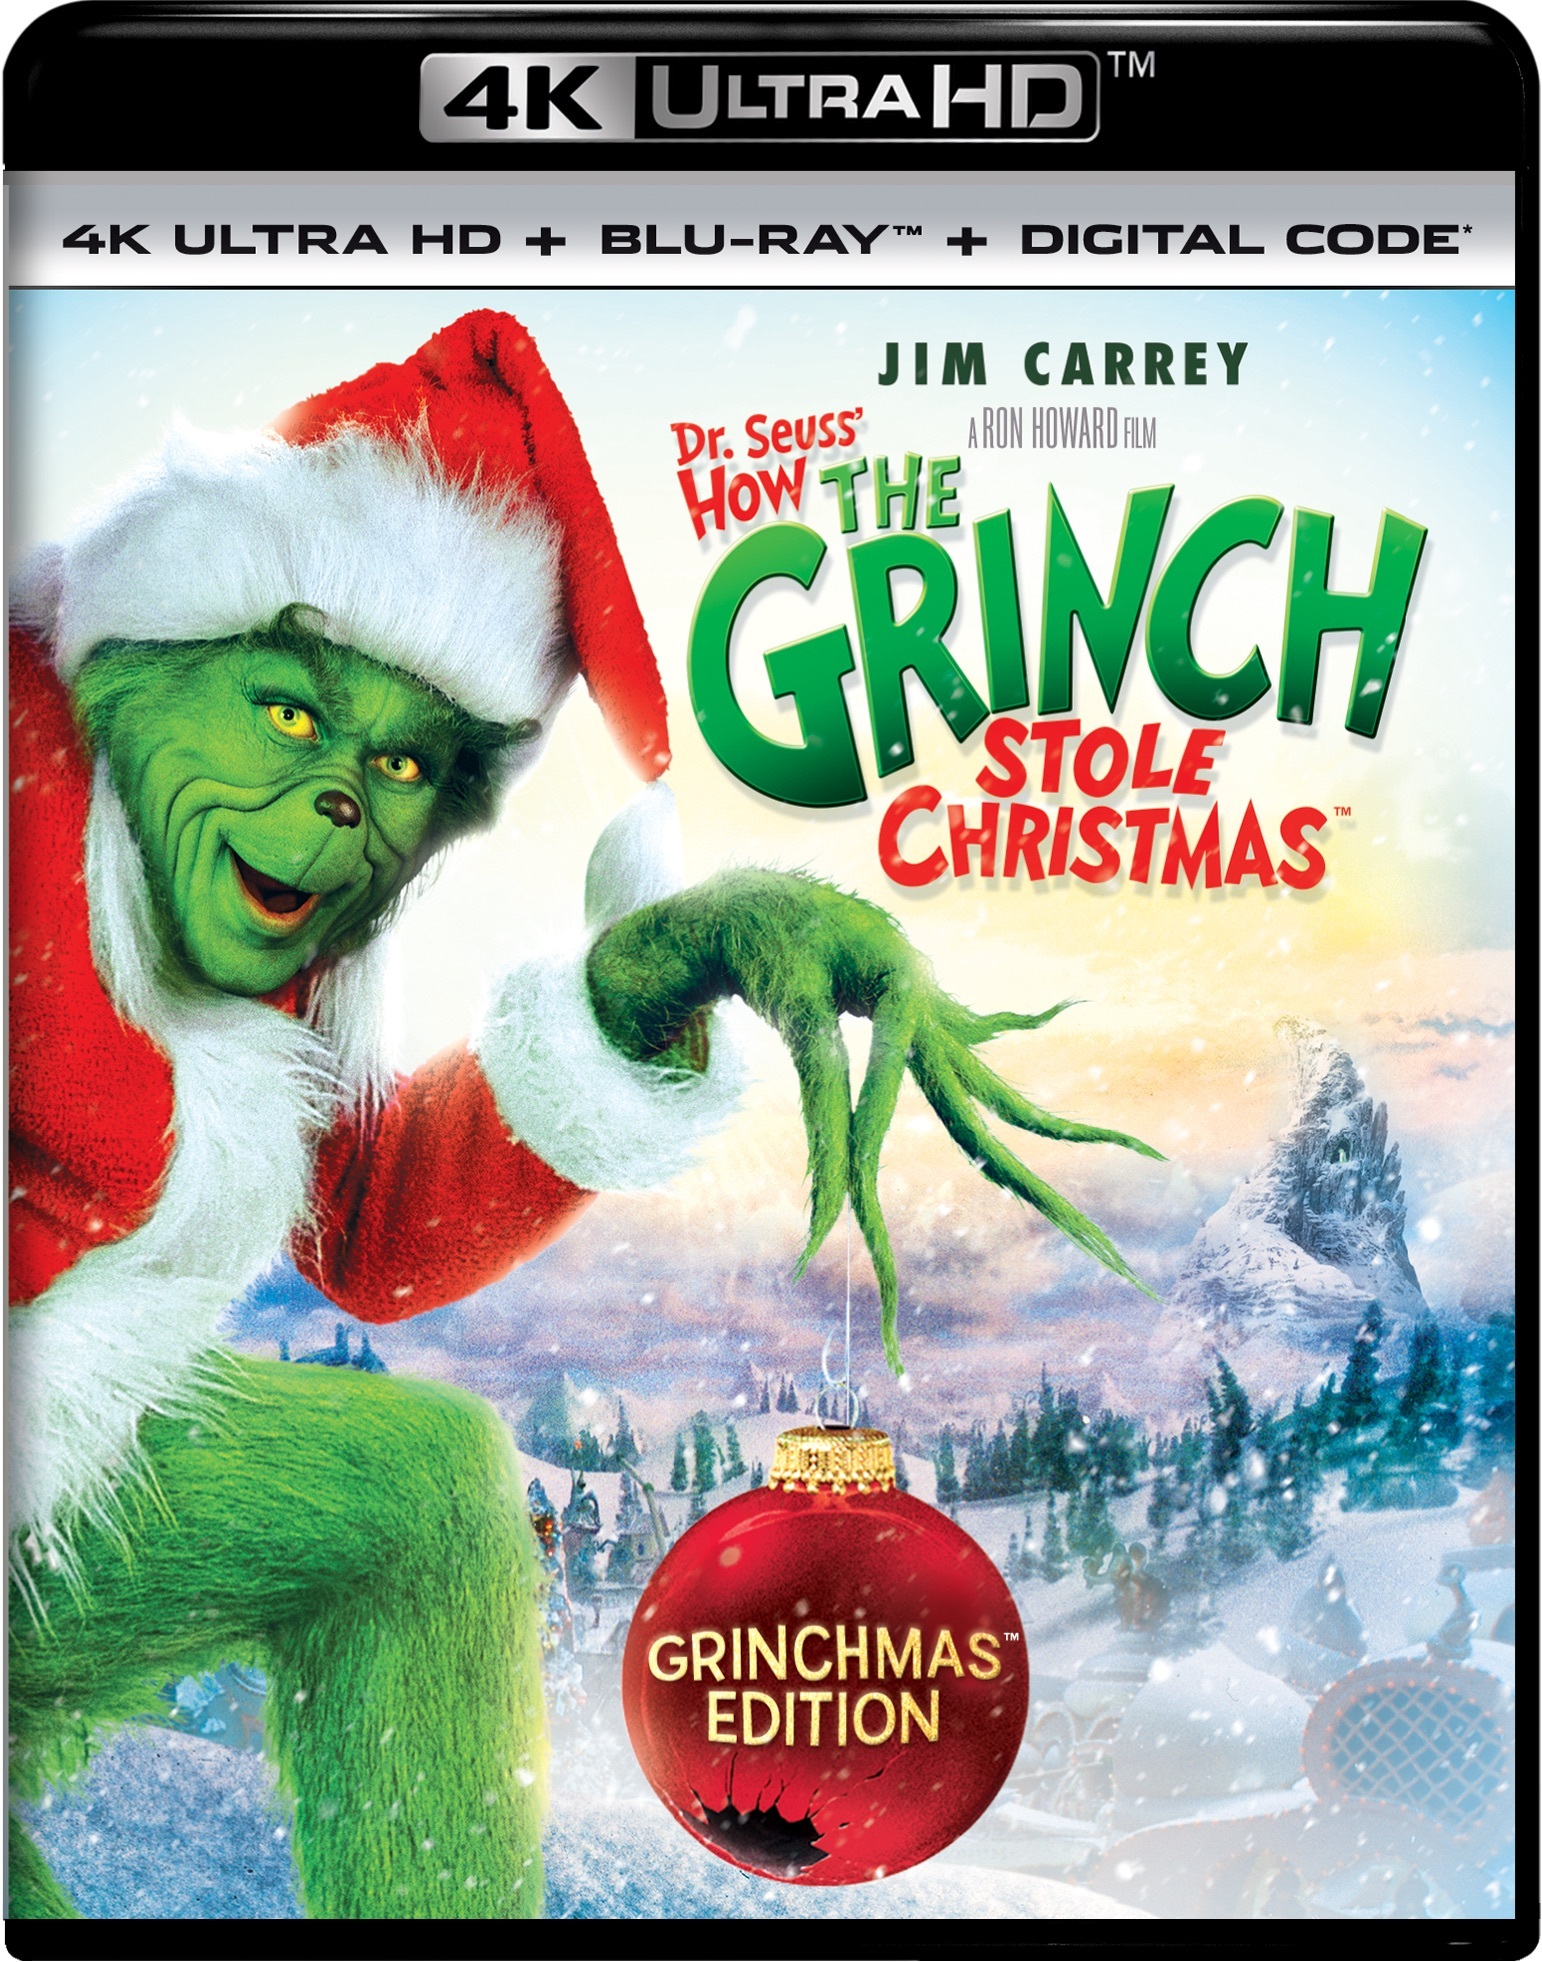 Dr. Seuss' How The Grinch Stole Christmas (Grinchmas Edition - 4K Ultra HD) - UHD [ 2000 ]  - Children Movies On 4K Ultra HD Blu-ray - Movies On GRUV